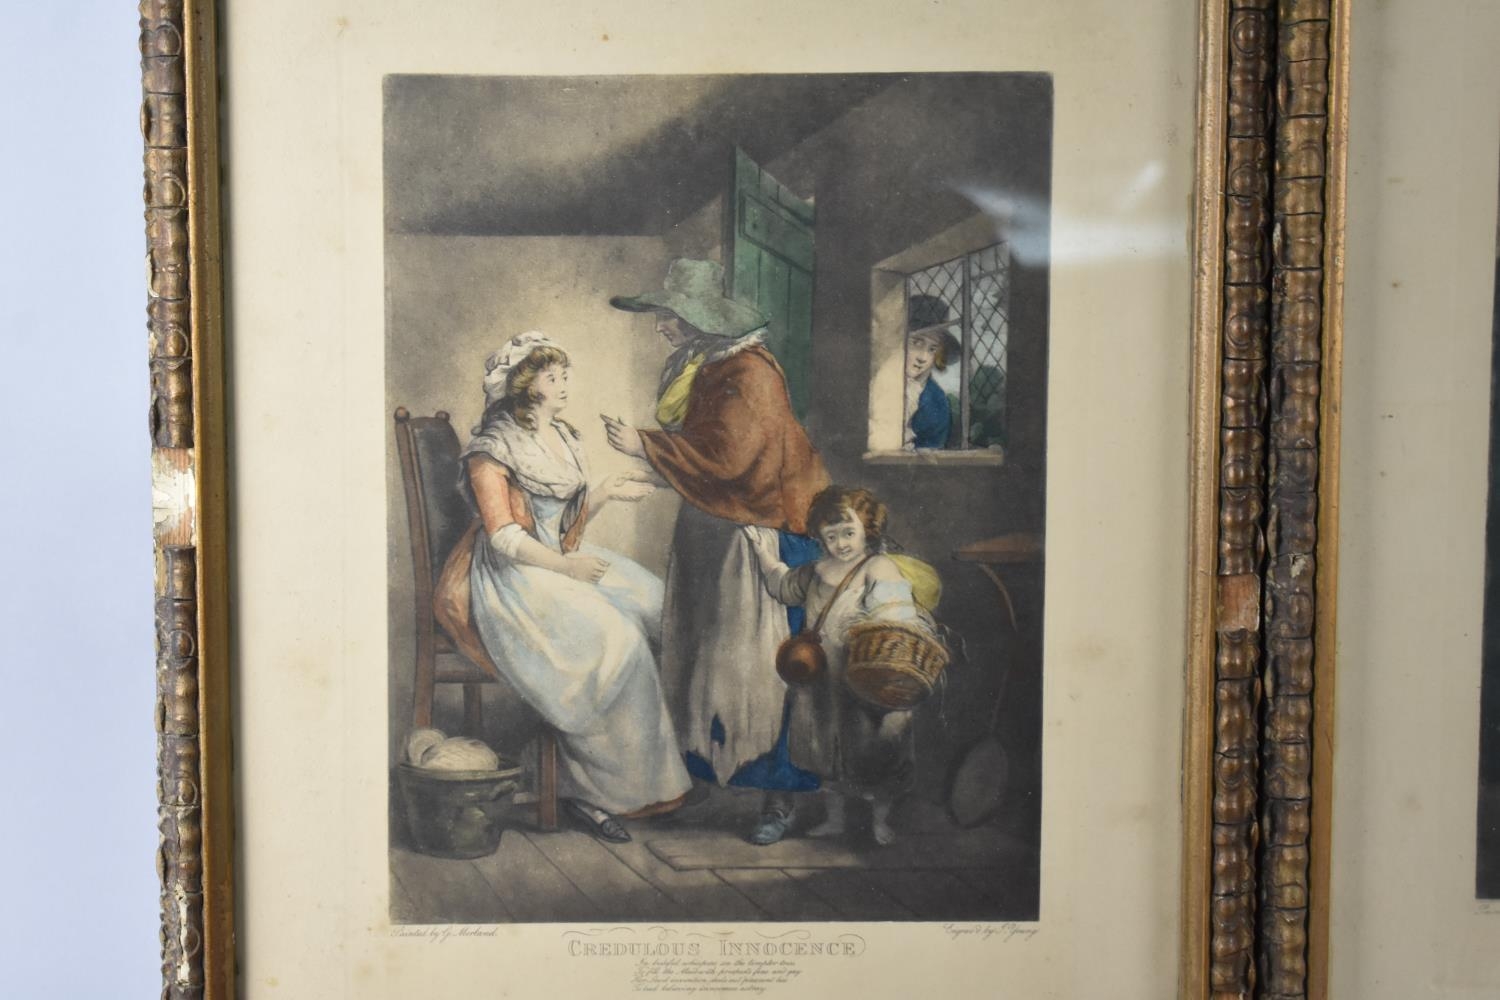 A Pair of Framed Prints of Engravings "Seduction" and "Credulous Innocence" by George Morland, - Image 2 of 3